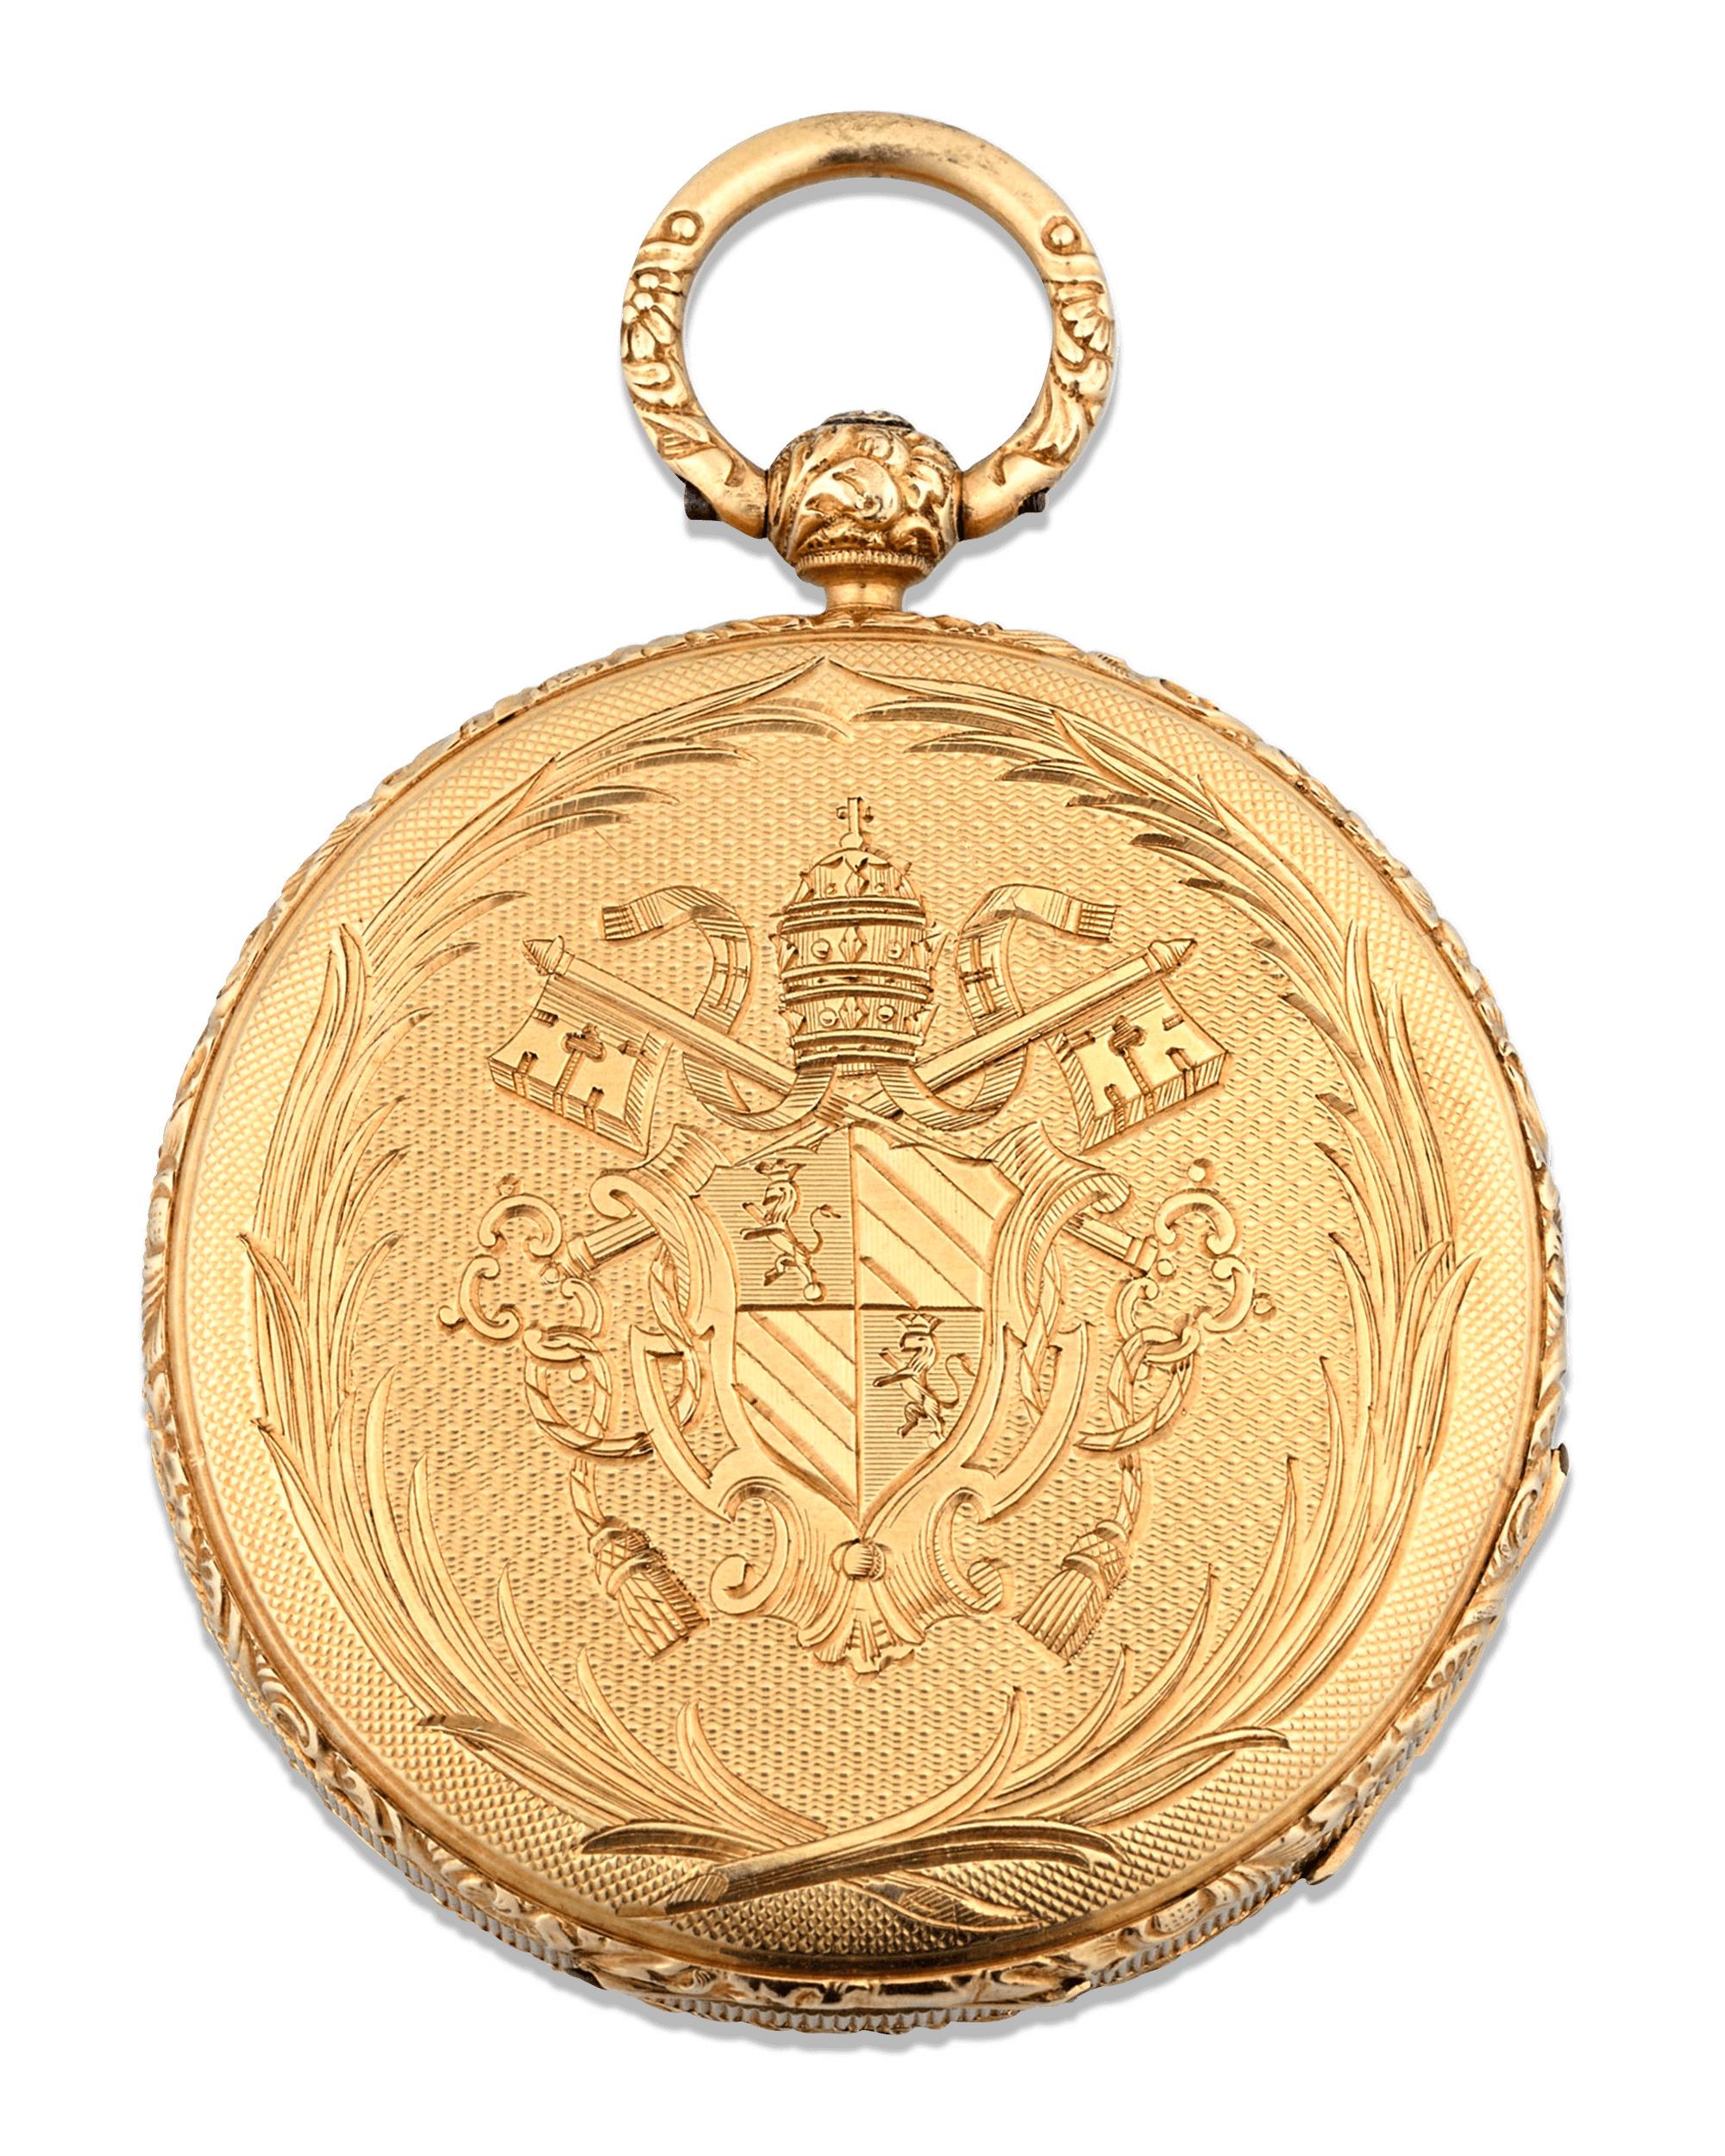 This immensely rare and masterfully crafted Swiss gold pocket watch was made for Pope Pius IX and is an exemplary specimen of 19th-century Swiss workmanship. Created by the legendary Parisian firm of Louis Aucoc, meticulously worked 18K gold forms